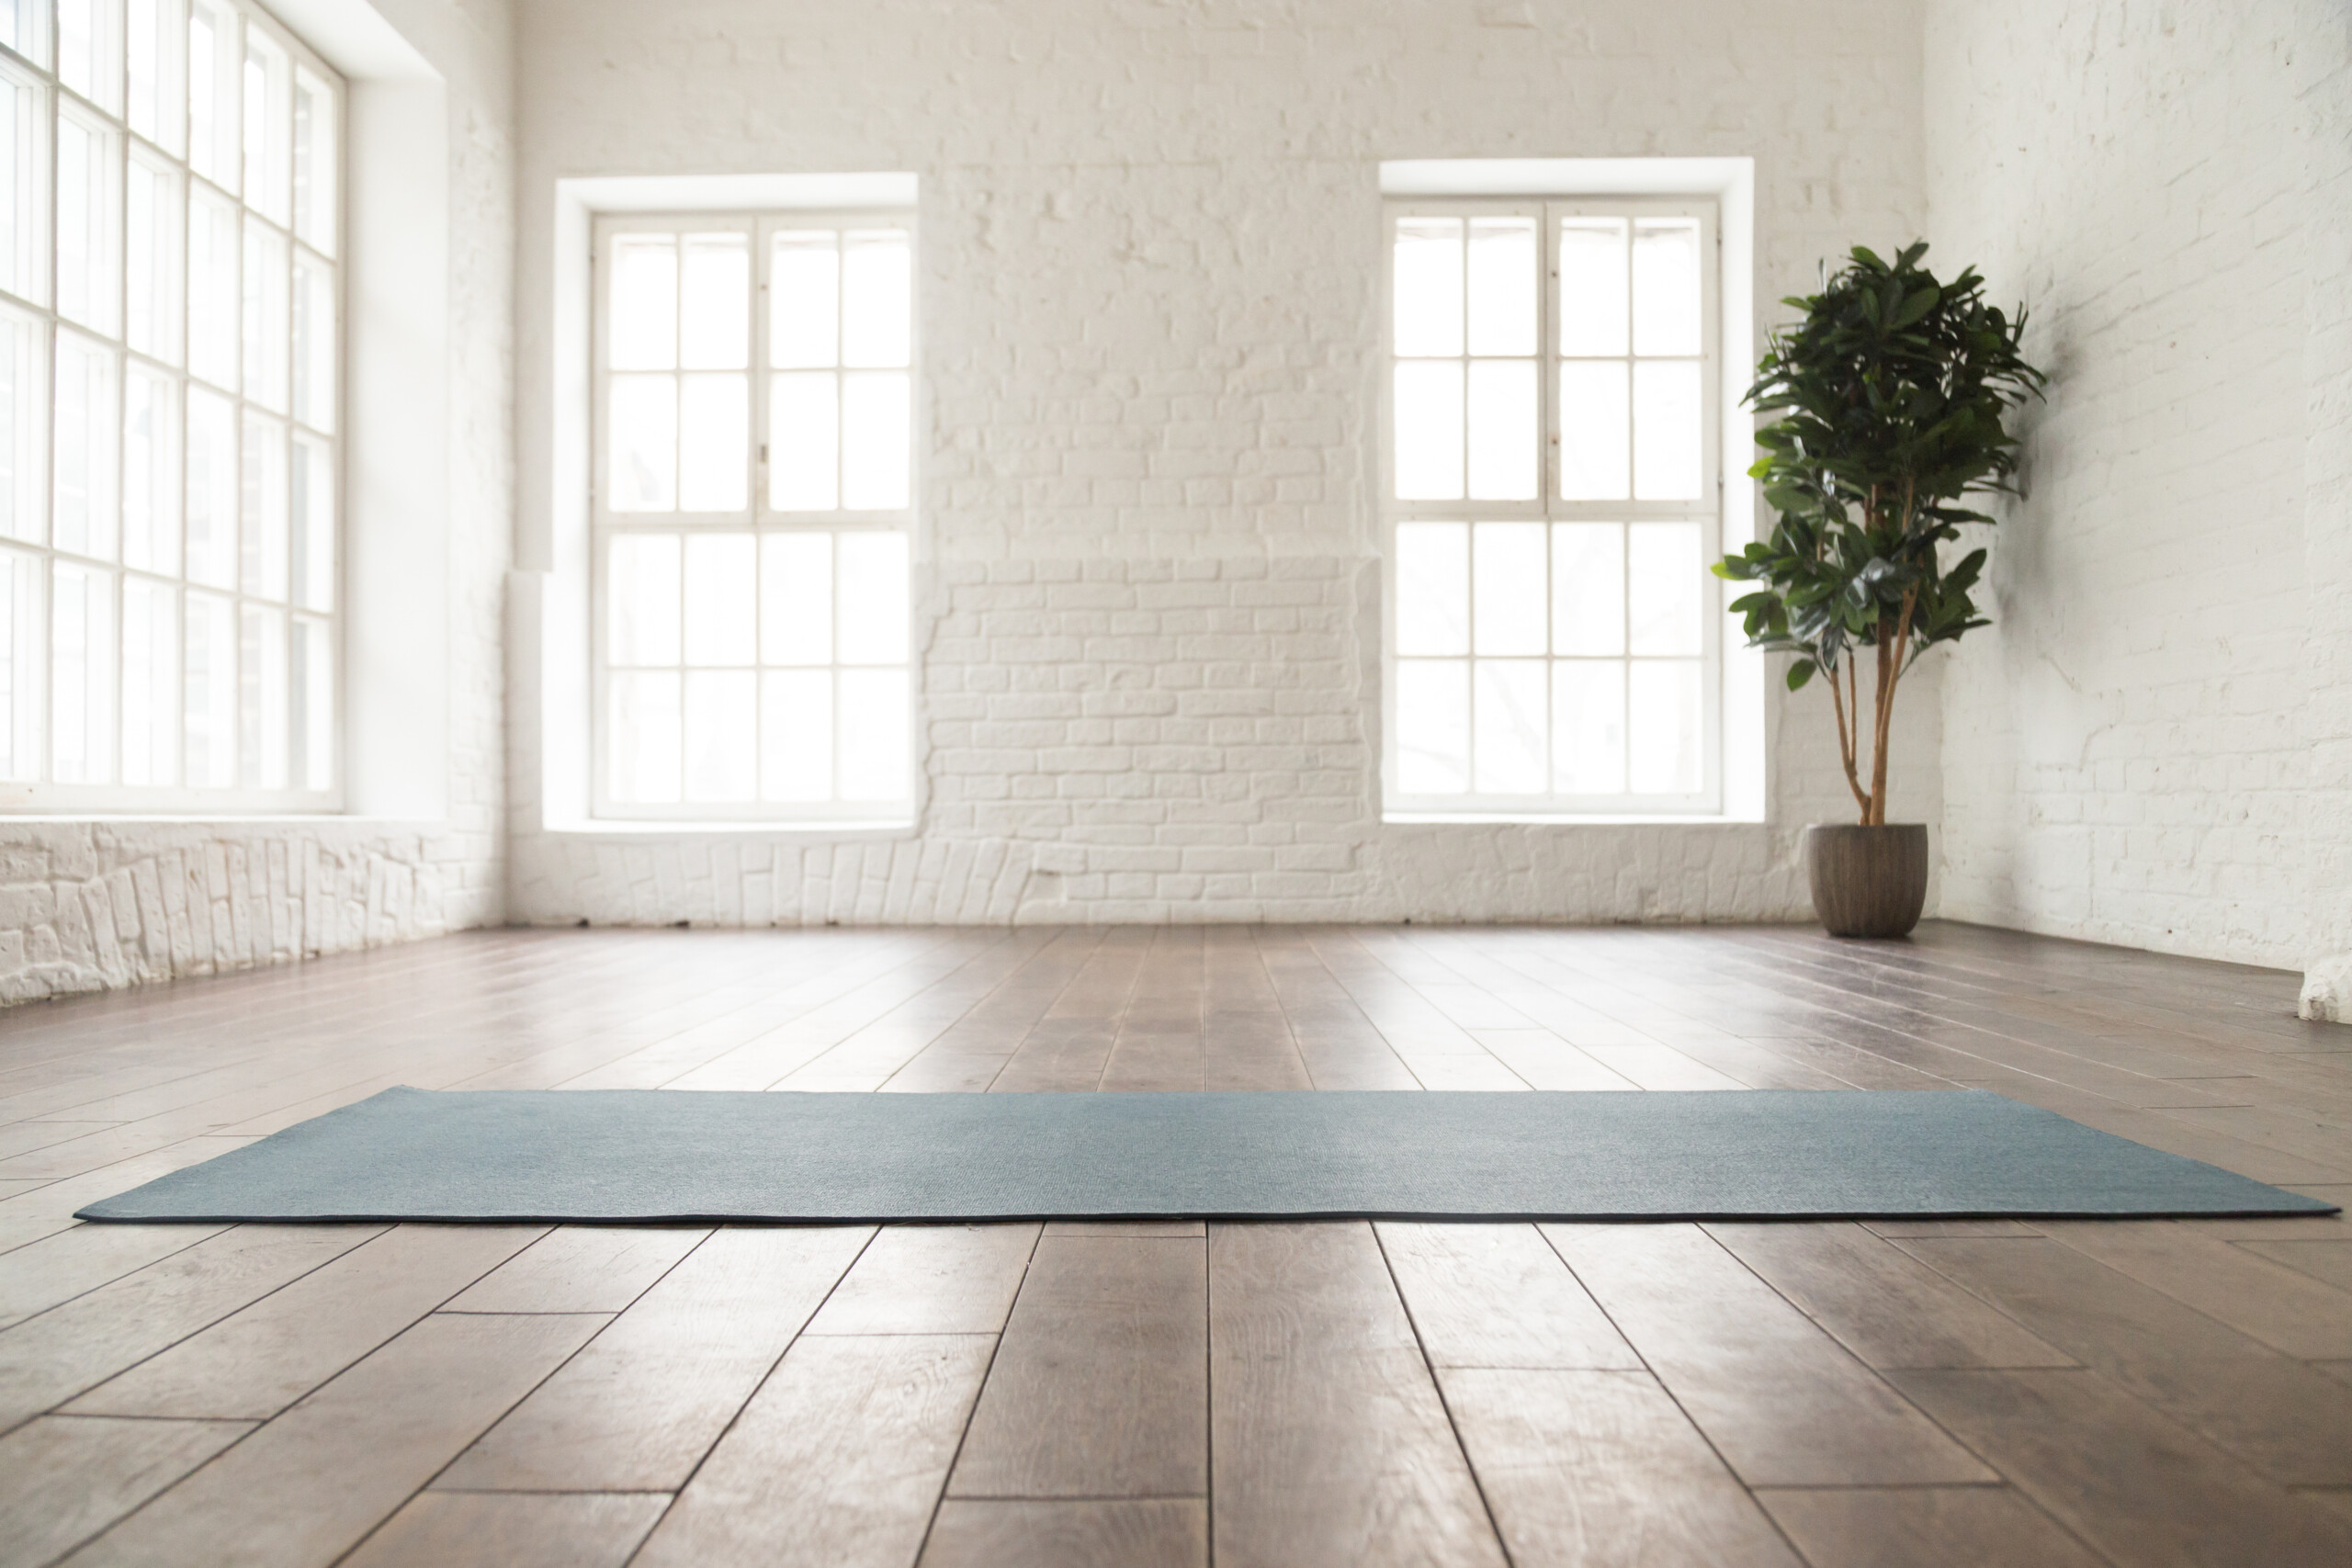 10 Great Ideas + Furnishings To Create A Spirited Meditation Room - Décor  Aid